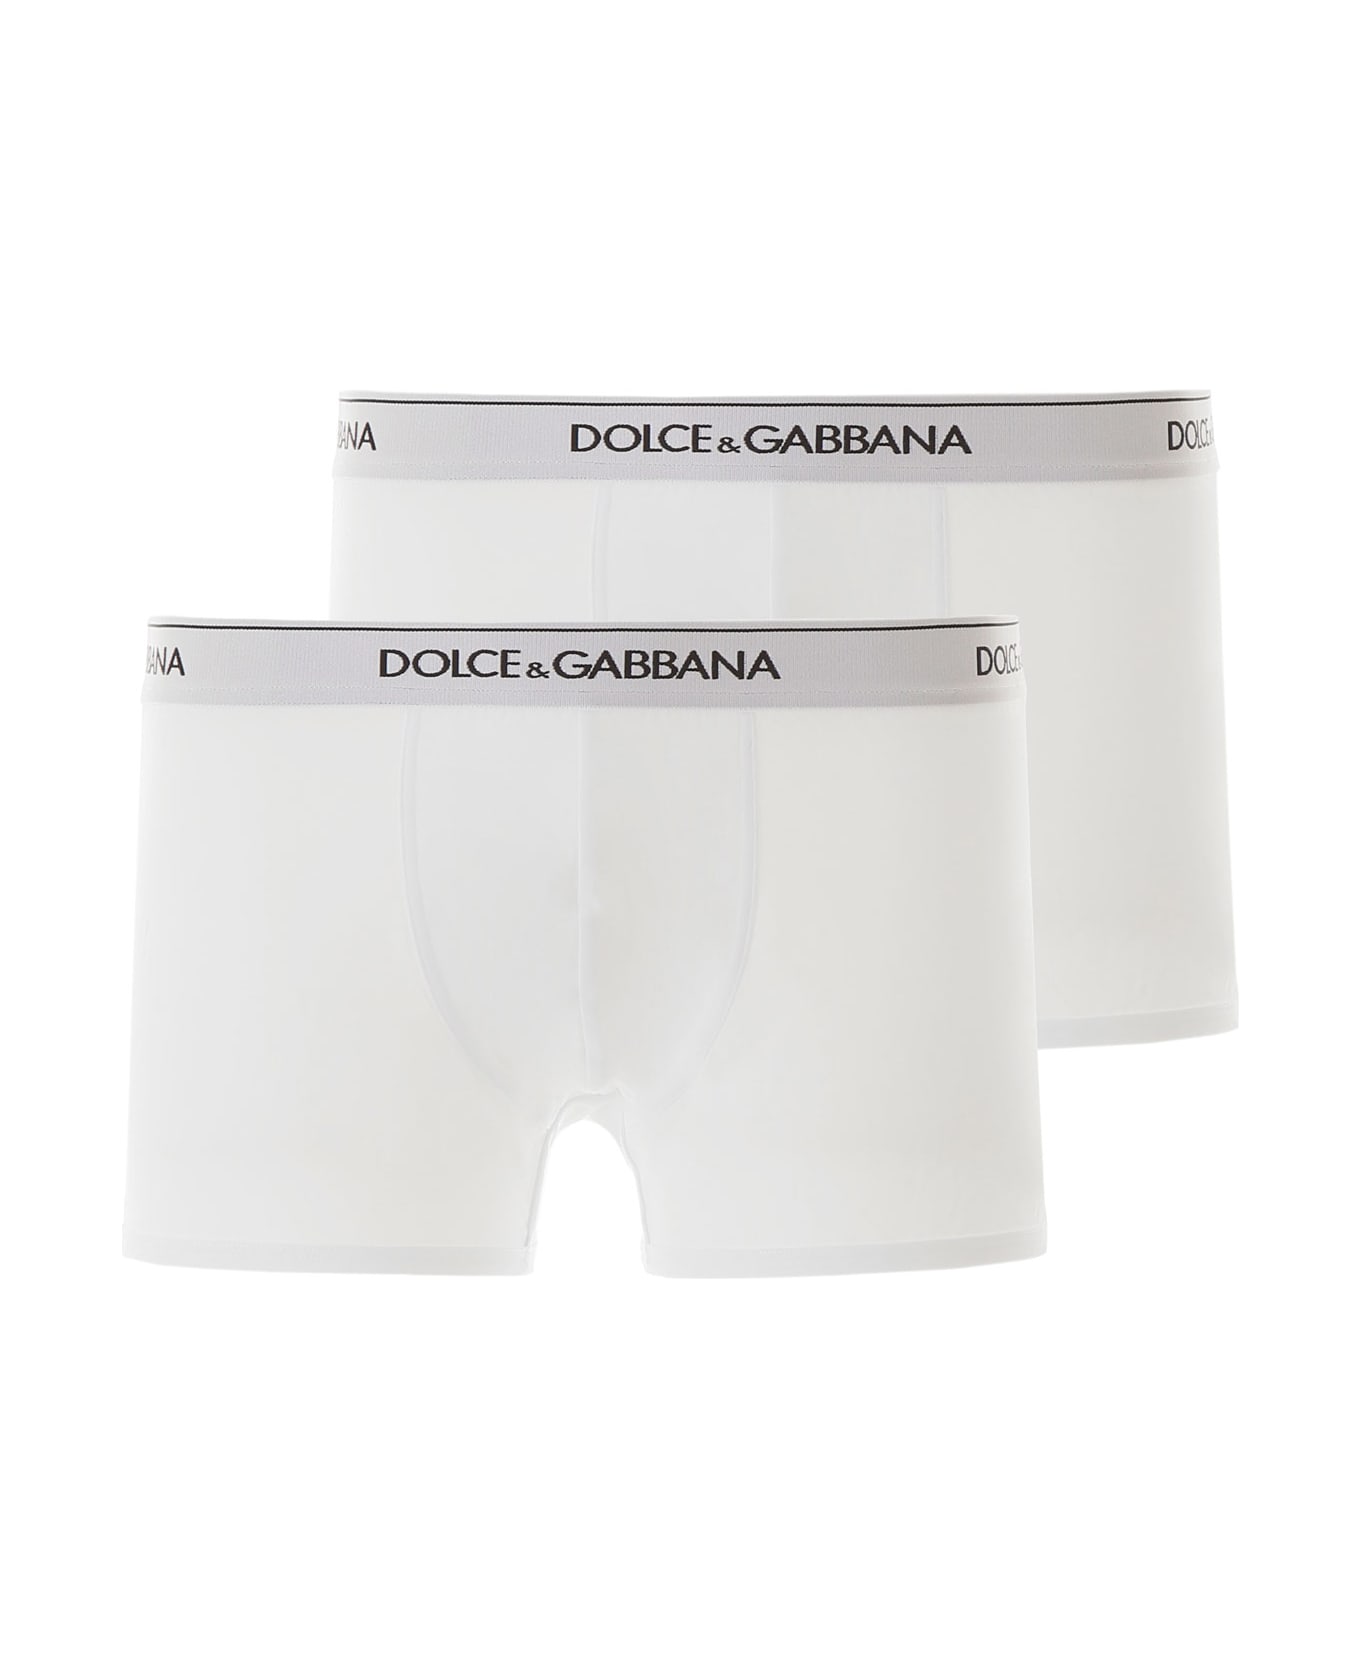 Dolce & Gabbana Two-panties Confection - Optic White